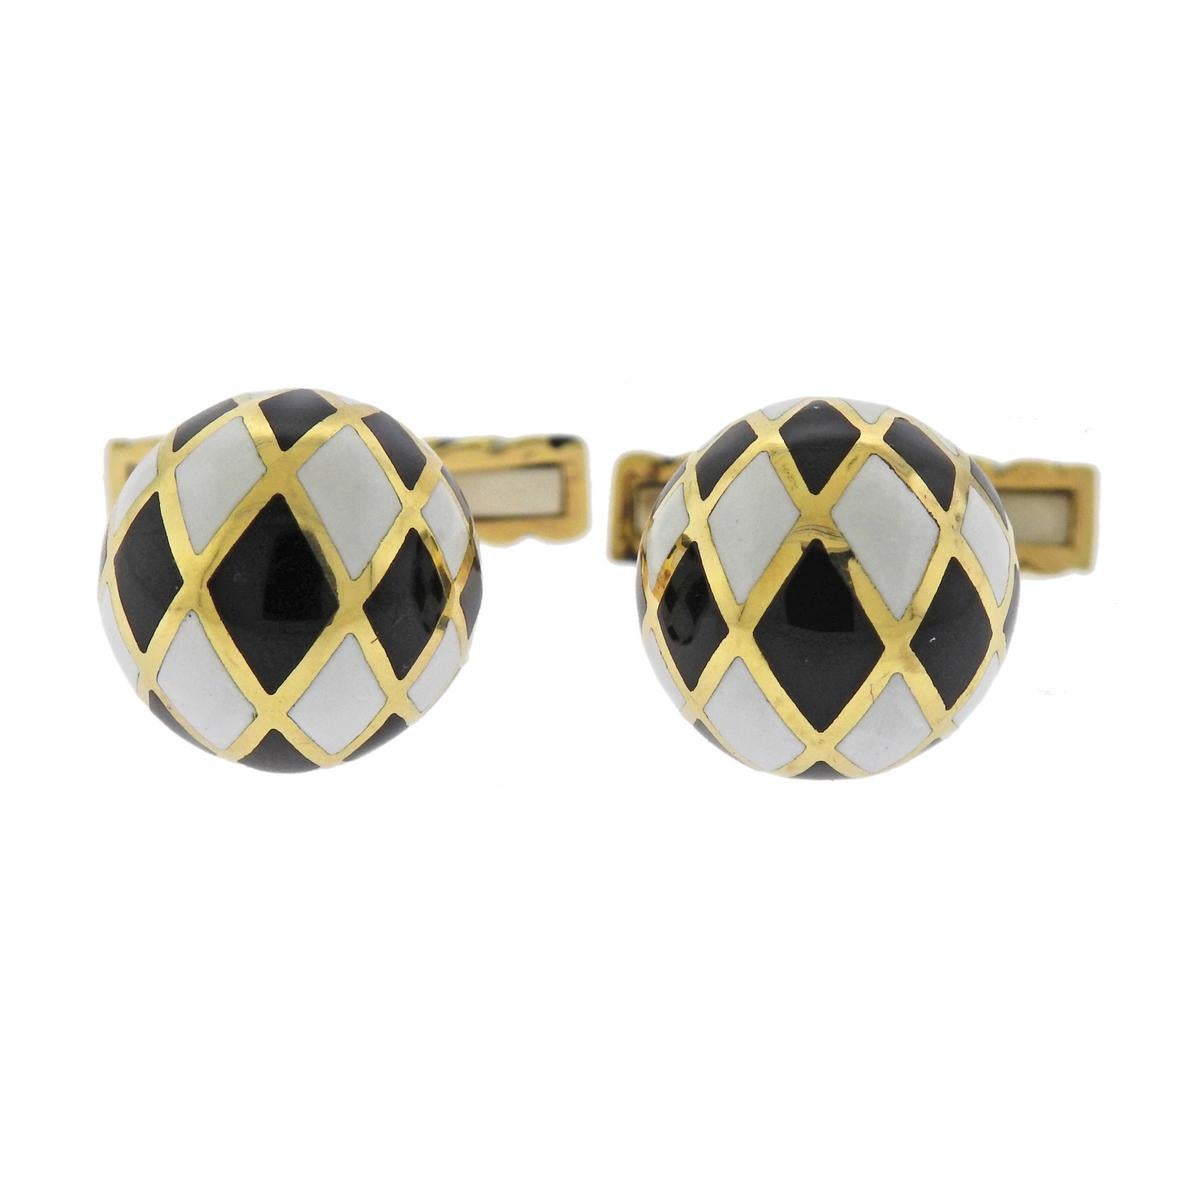 Pair of 18k yellow gold cufflinks by David Webb, set with black and white enamel top.   Cufflink top is 14.2mm in diameter, weigh 16.8 grams. Marked: Webb and 18k.